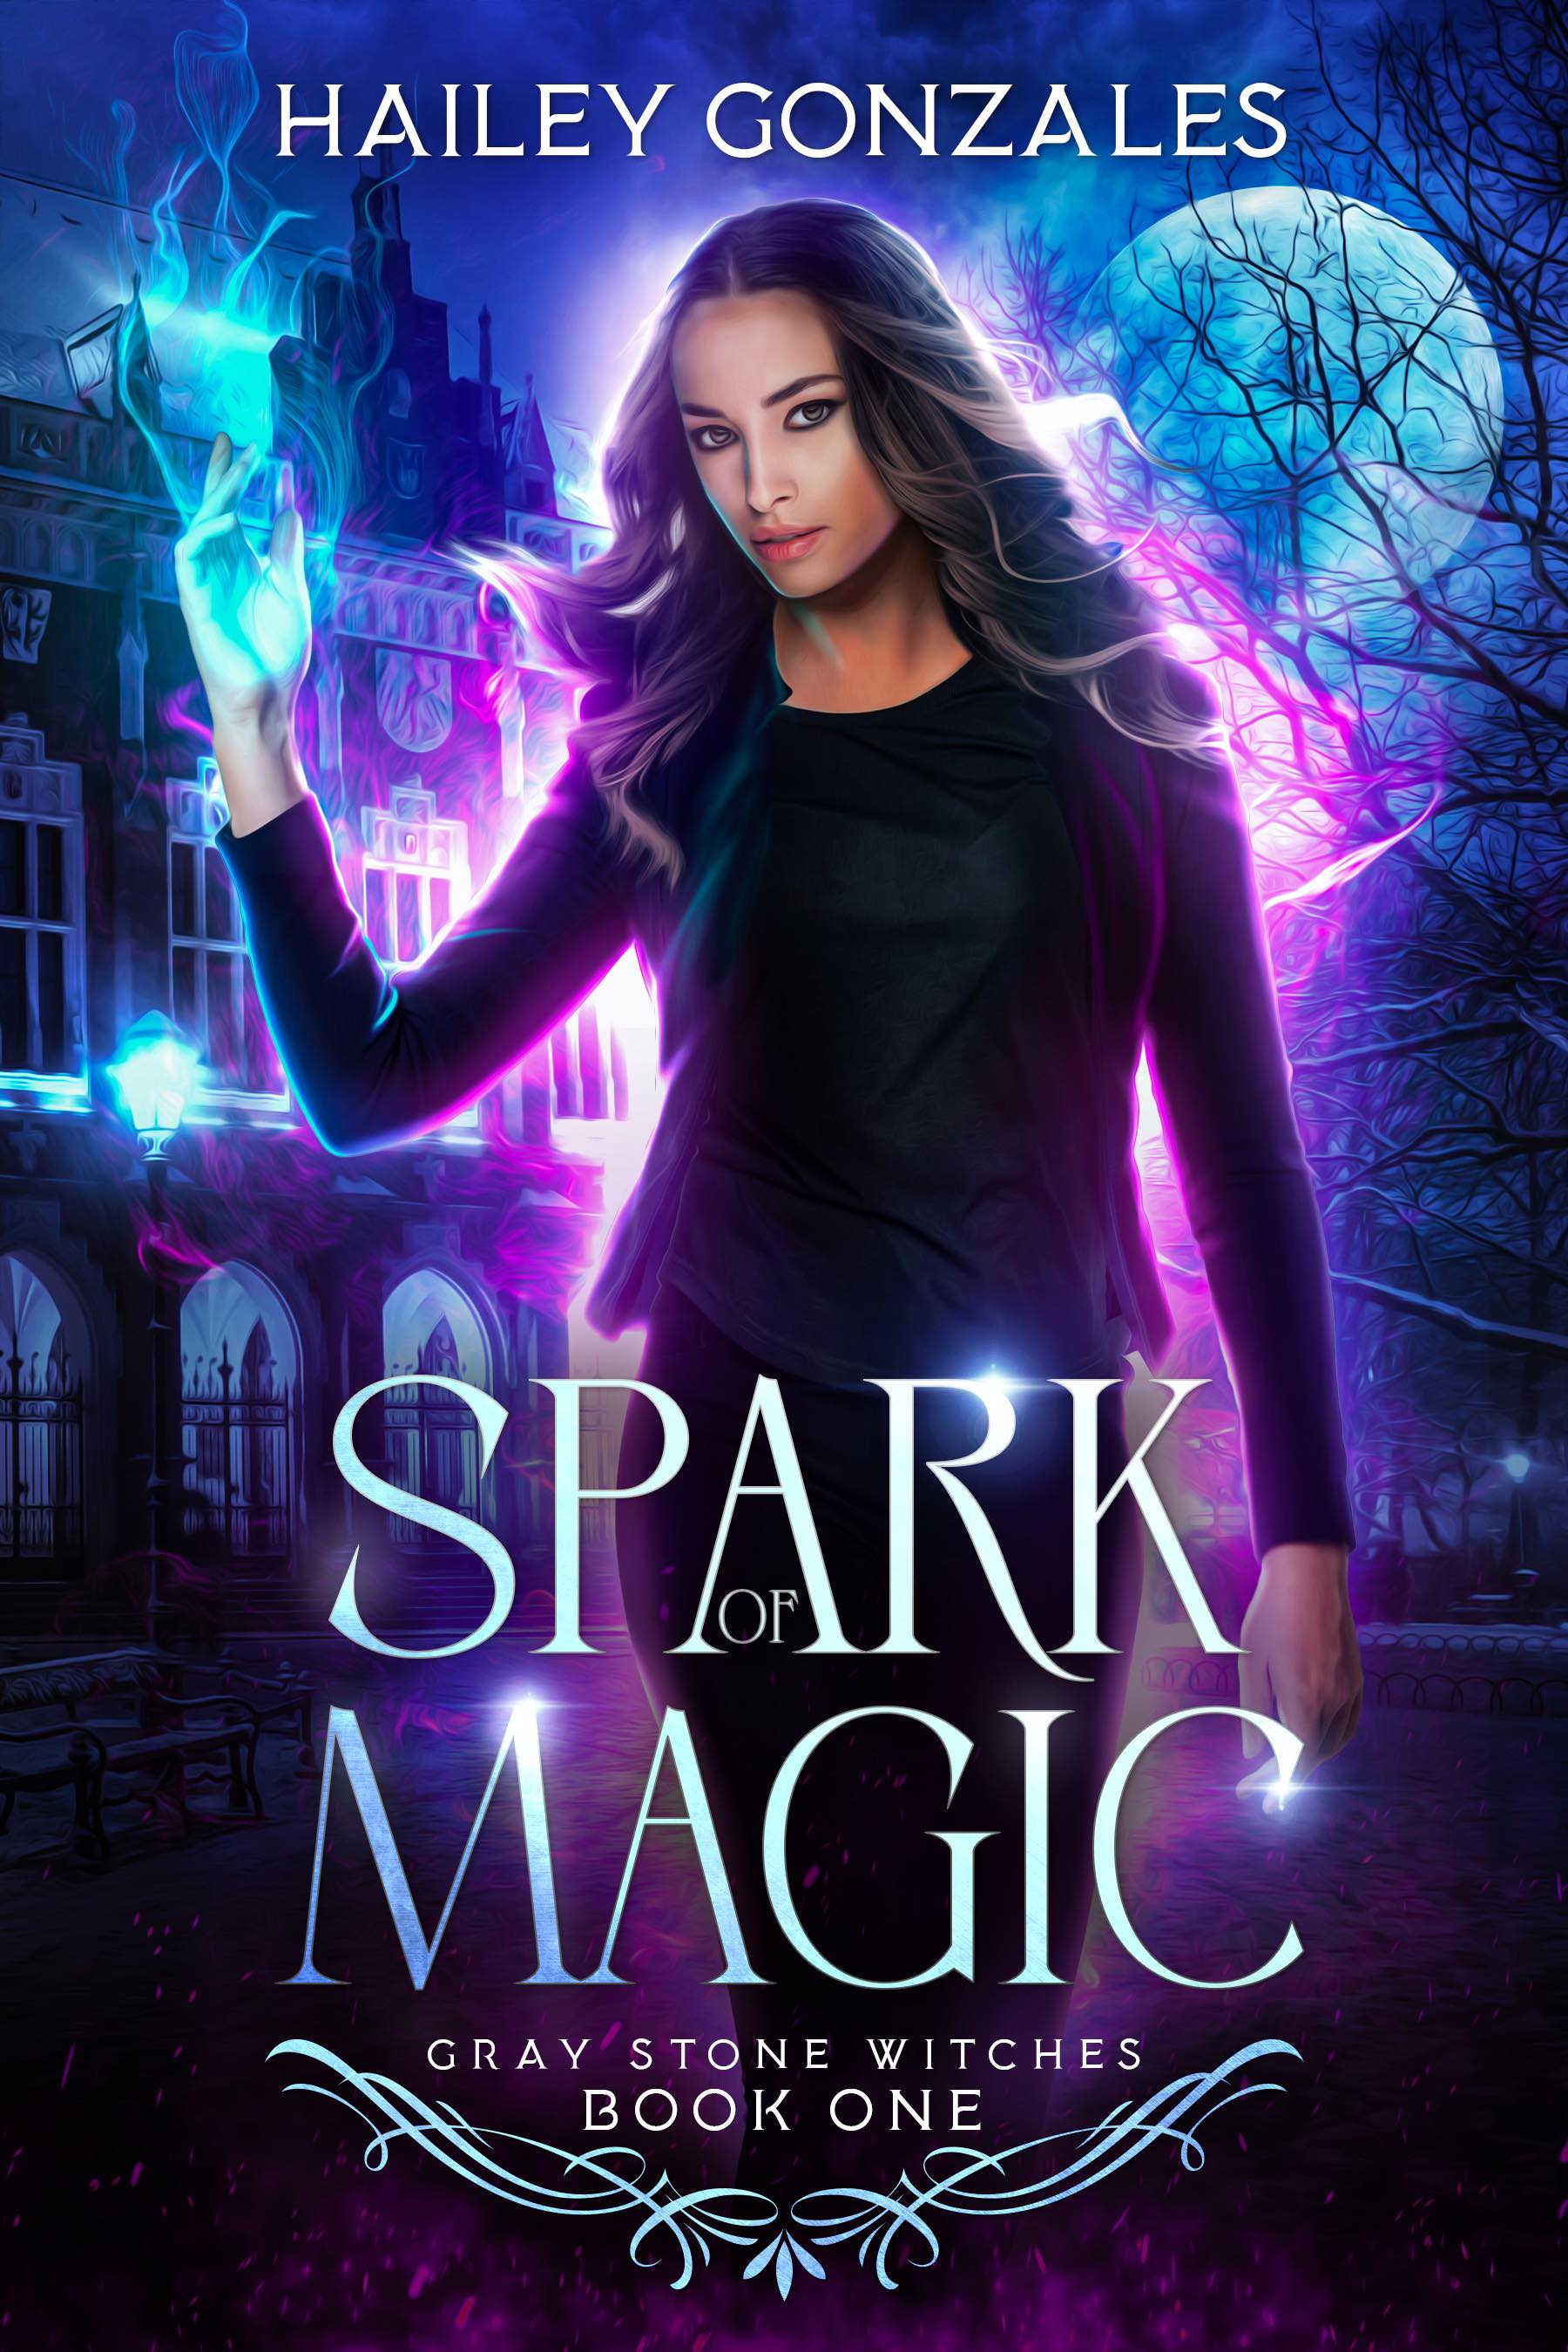 spark-of-magic-gray-stone-witches-book-one